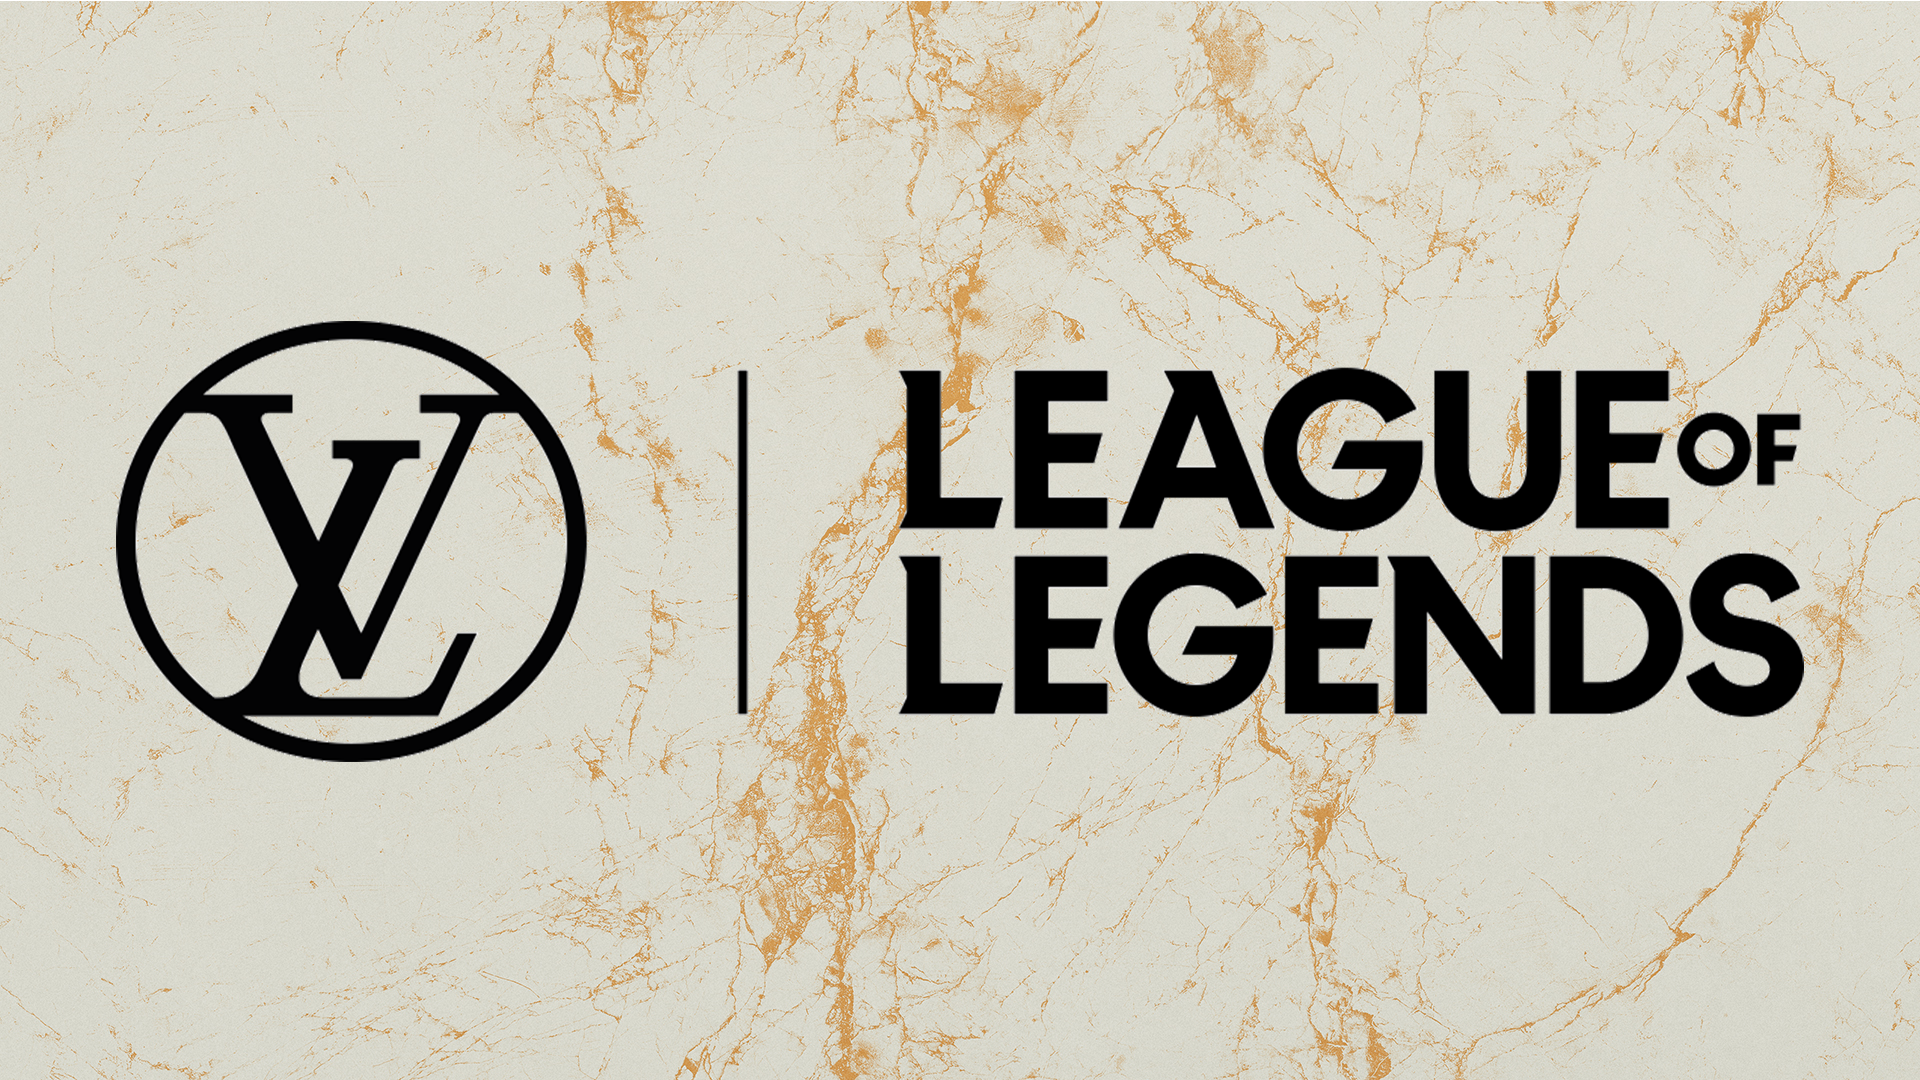 Image for Louis Vuitton teams up with League of Legends on a digital fashion collection